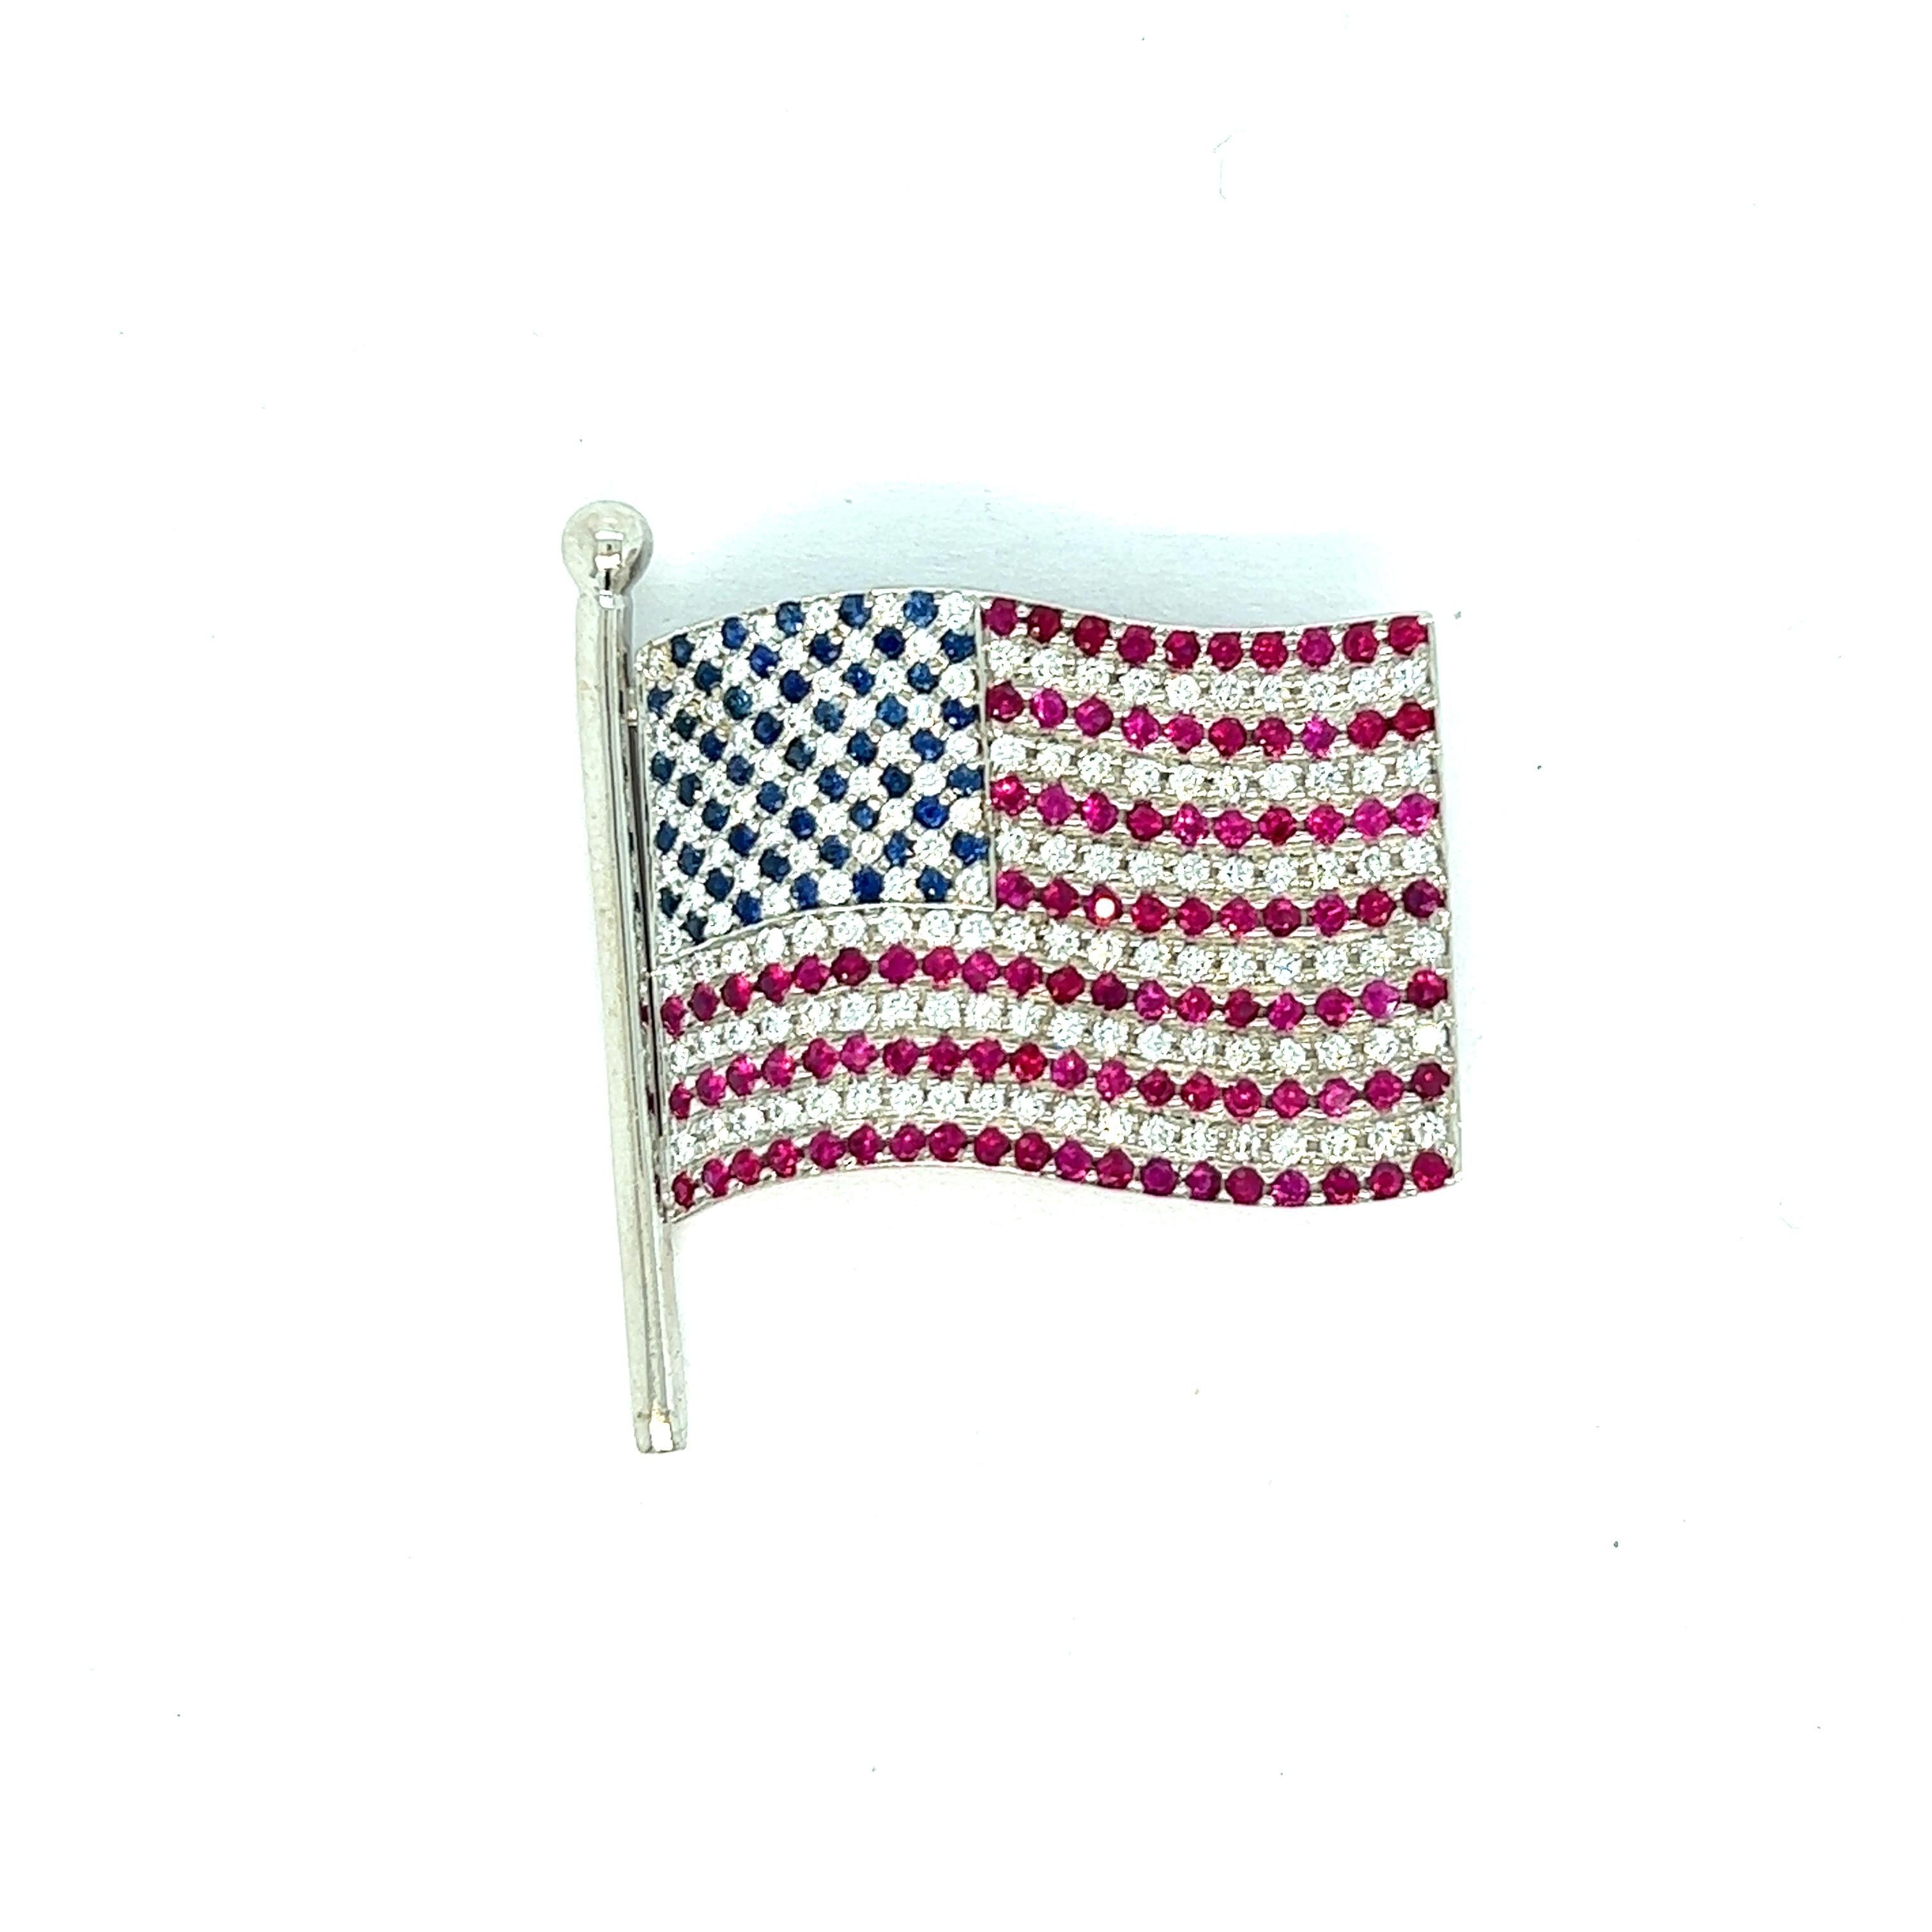 American flag pin brooch

Round-cut diamonds, sapphires, and rubies set on 18 karat white gold; marked Carelle, 750

Size: width 3 cm, length 3.5 cm
Total weight: 13.4 grams